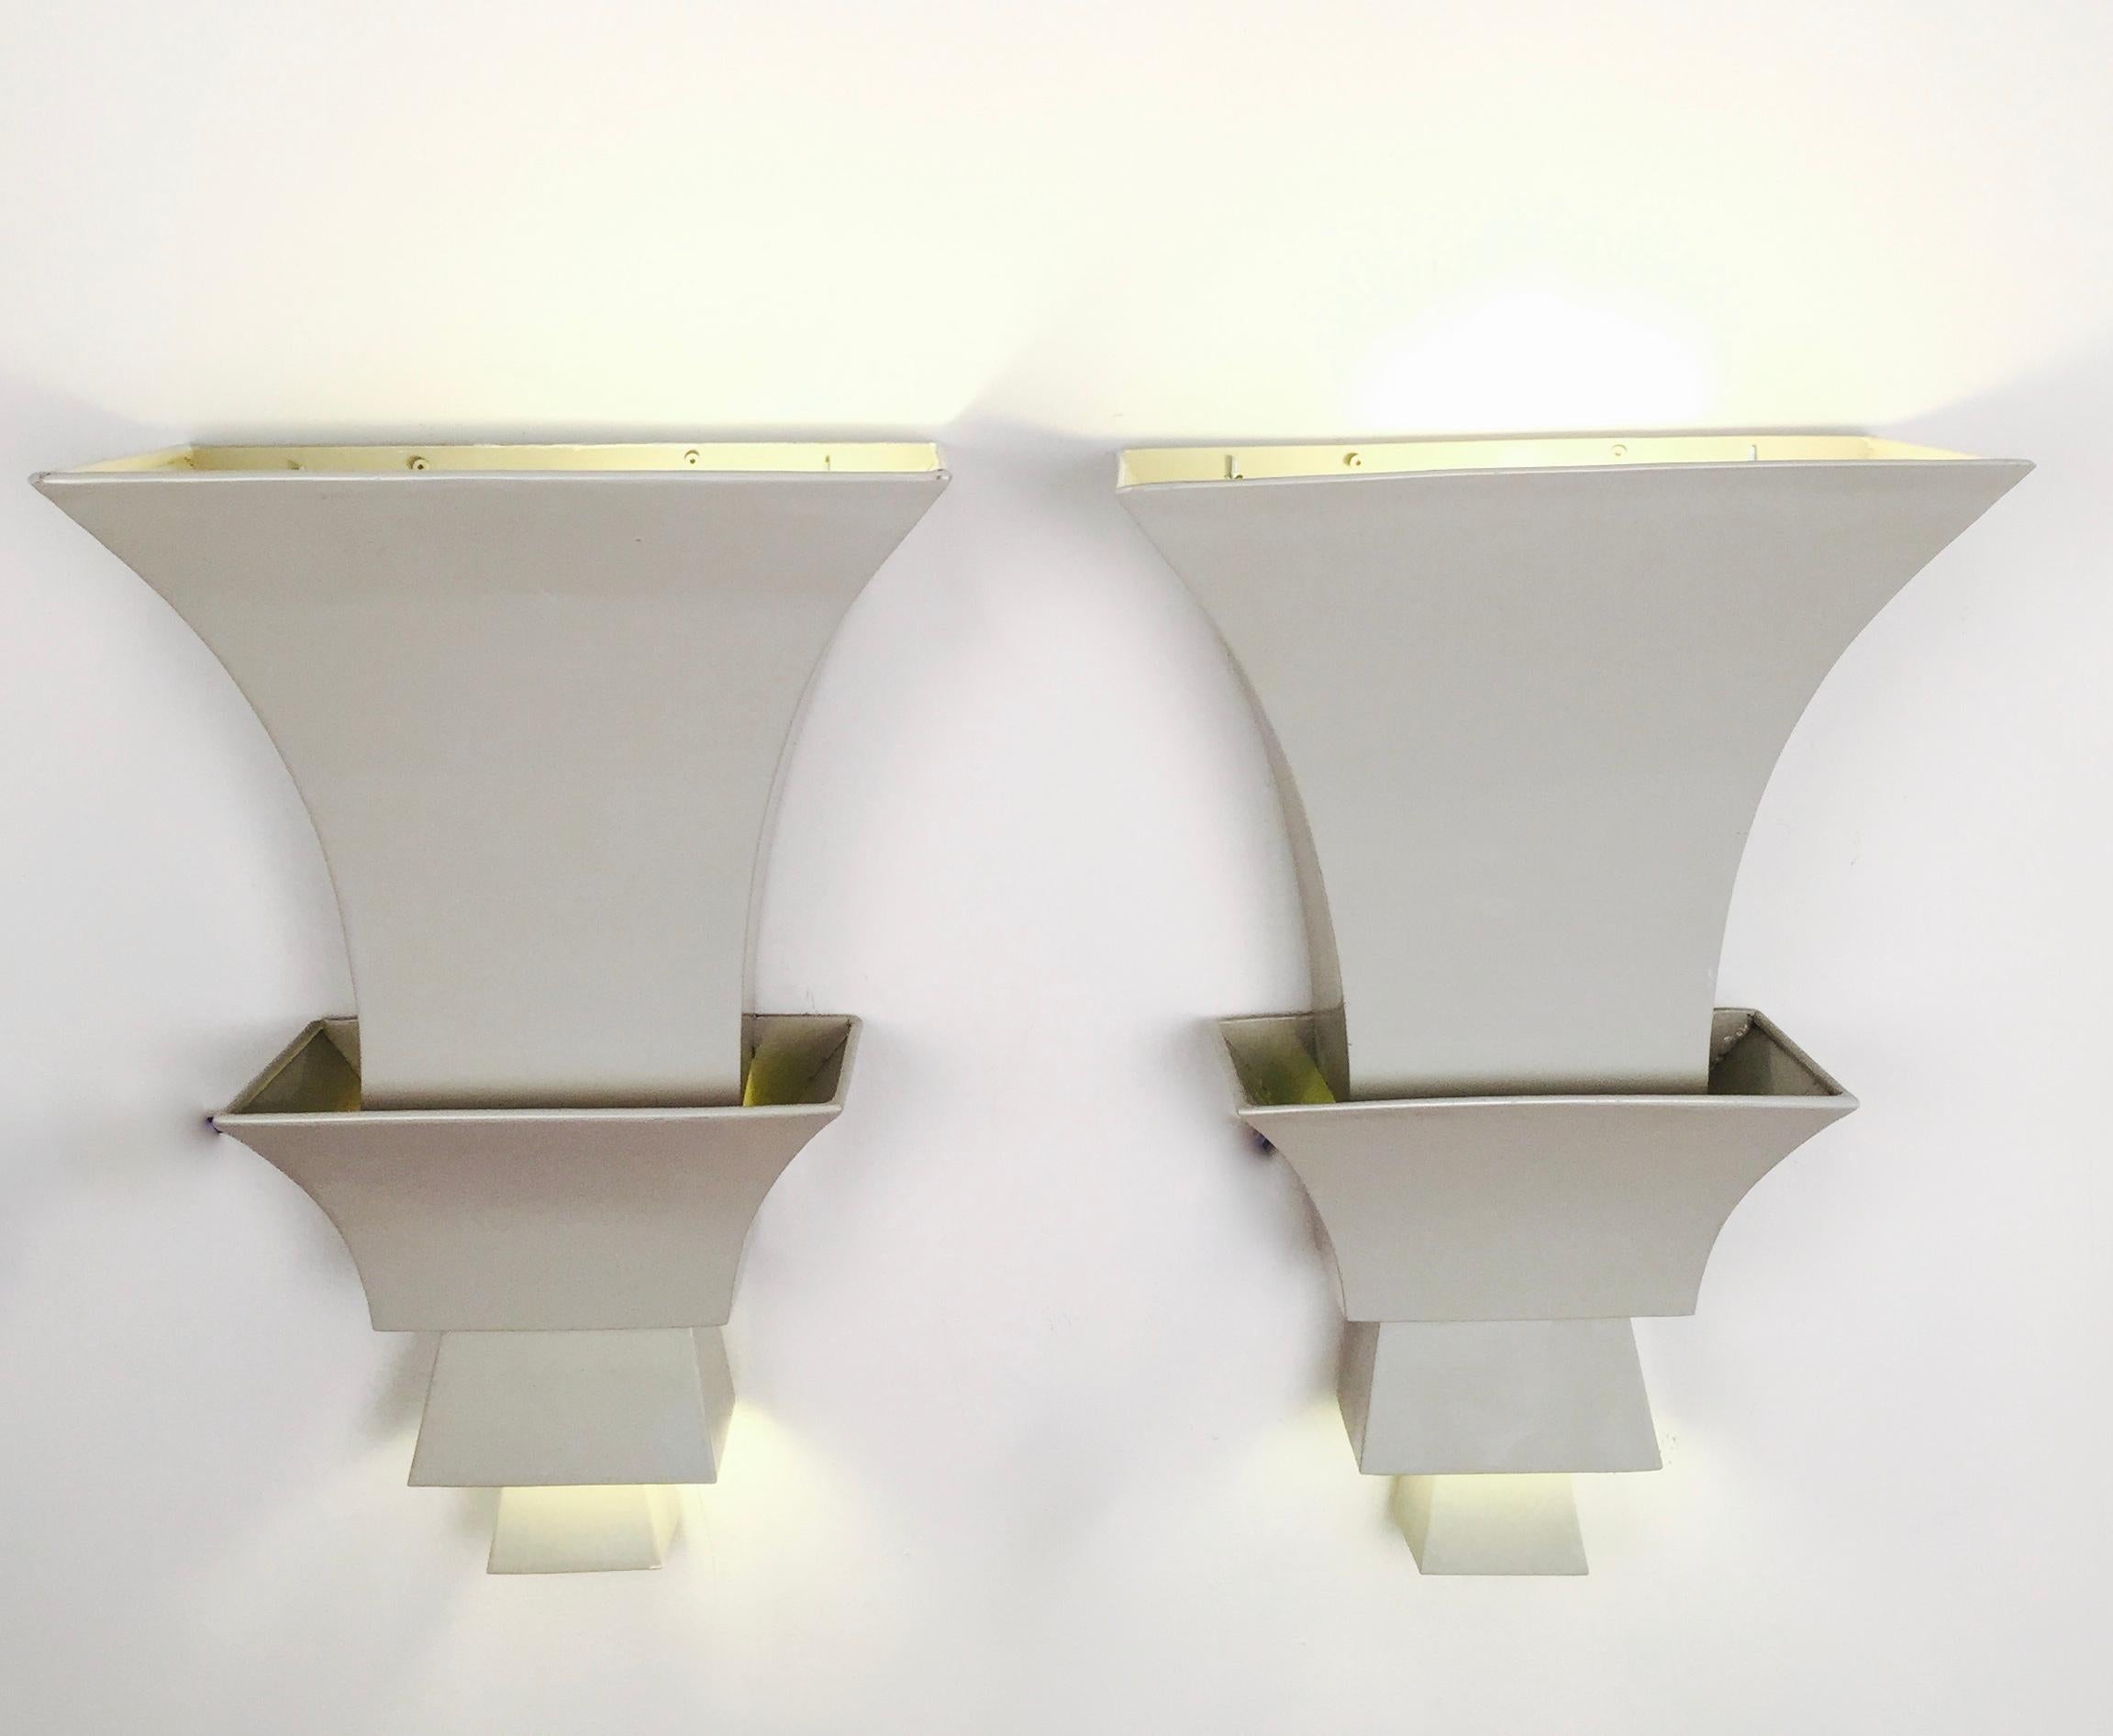 A stunning pair of Spanish 1972 metal sconces. Frame of white-grey enameled metal.
Provenance: Form the luxurious Madrid Villa Magna Hotel opened in 1972 and closed down for renovation in 2021.
Vid attache images.
Two pairs available.